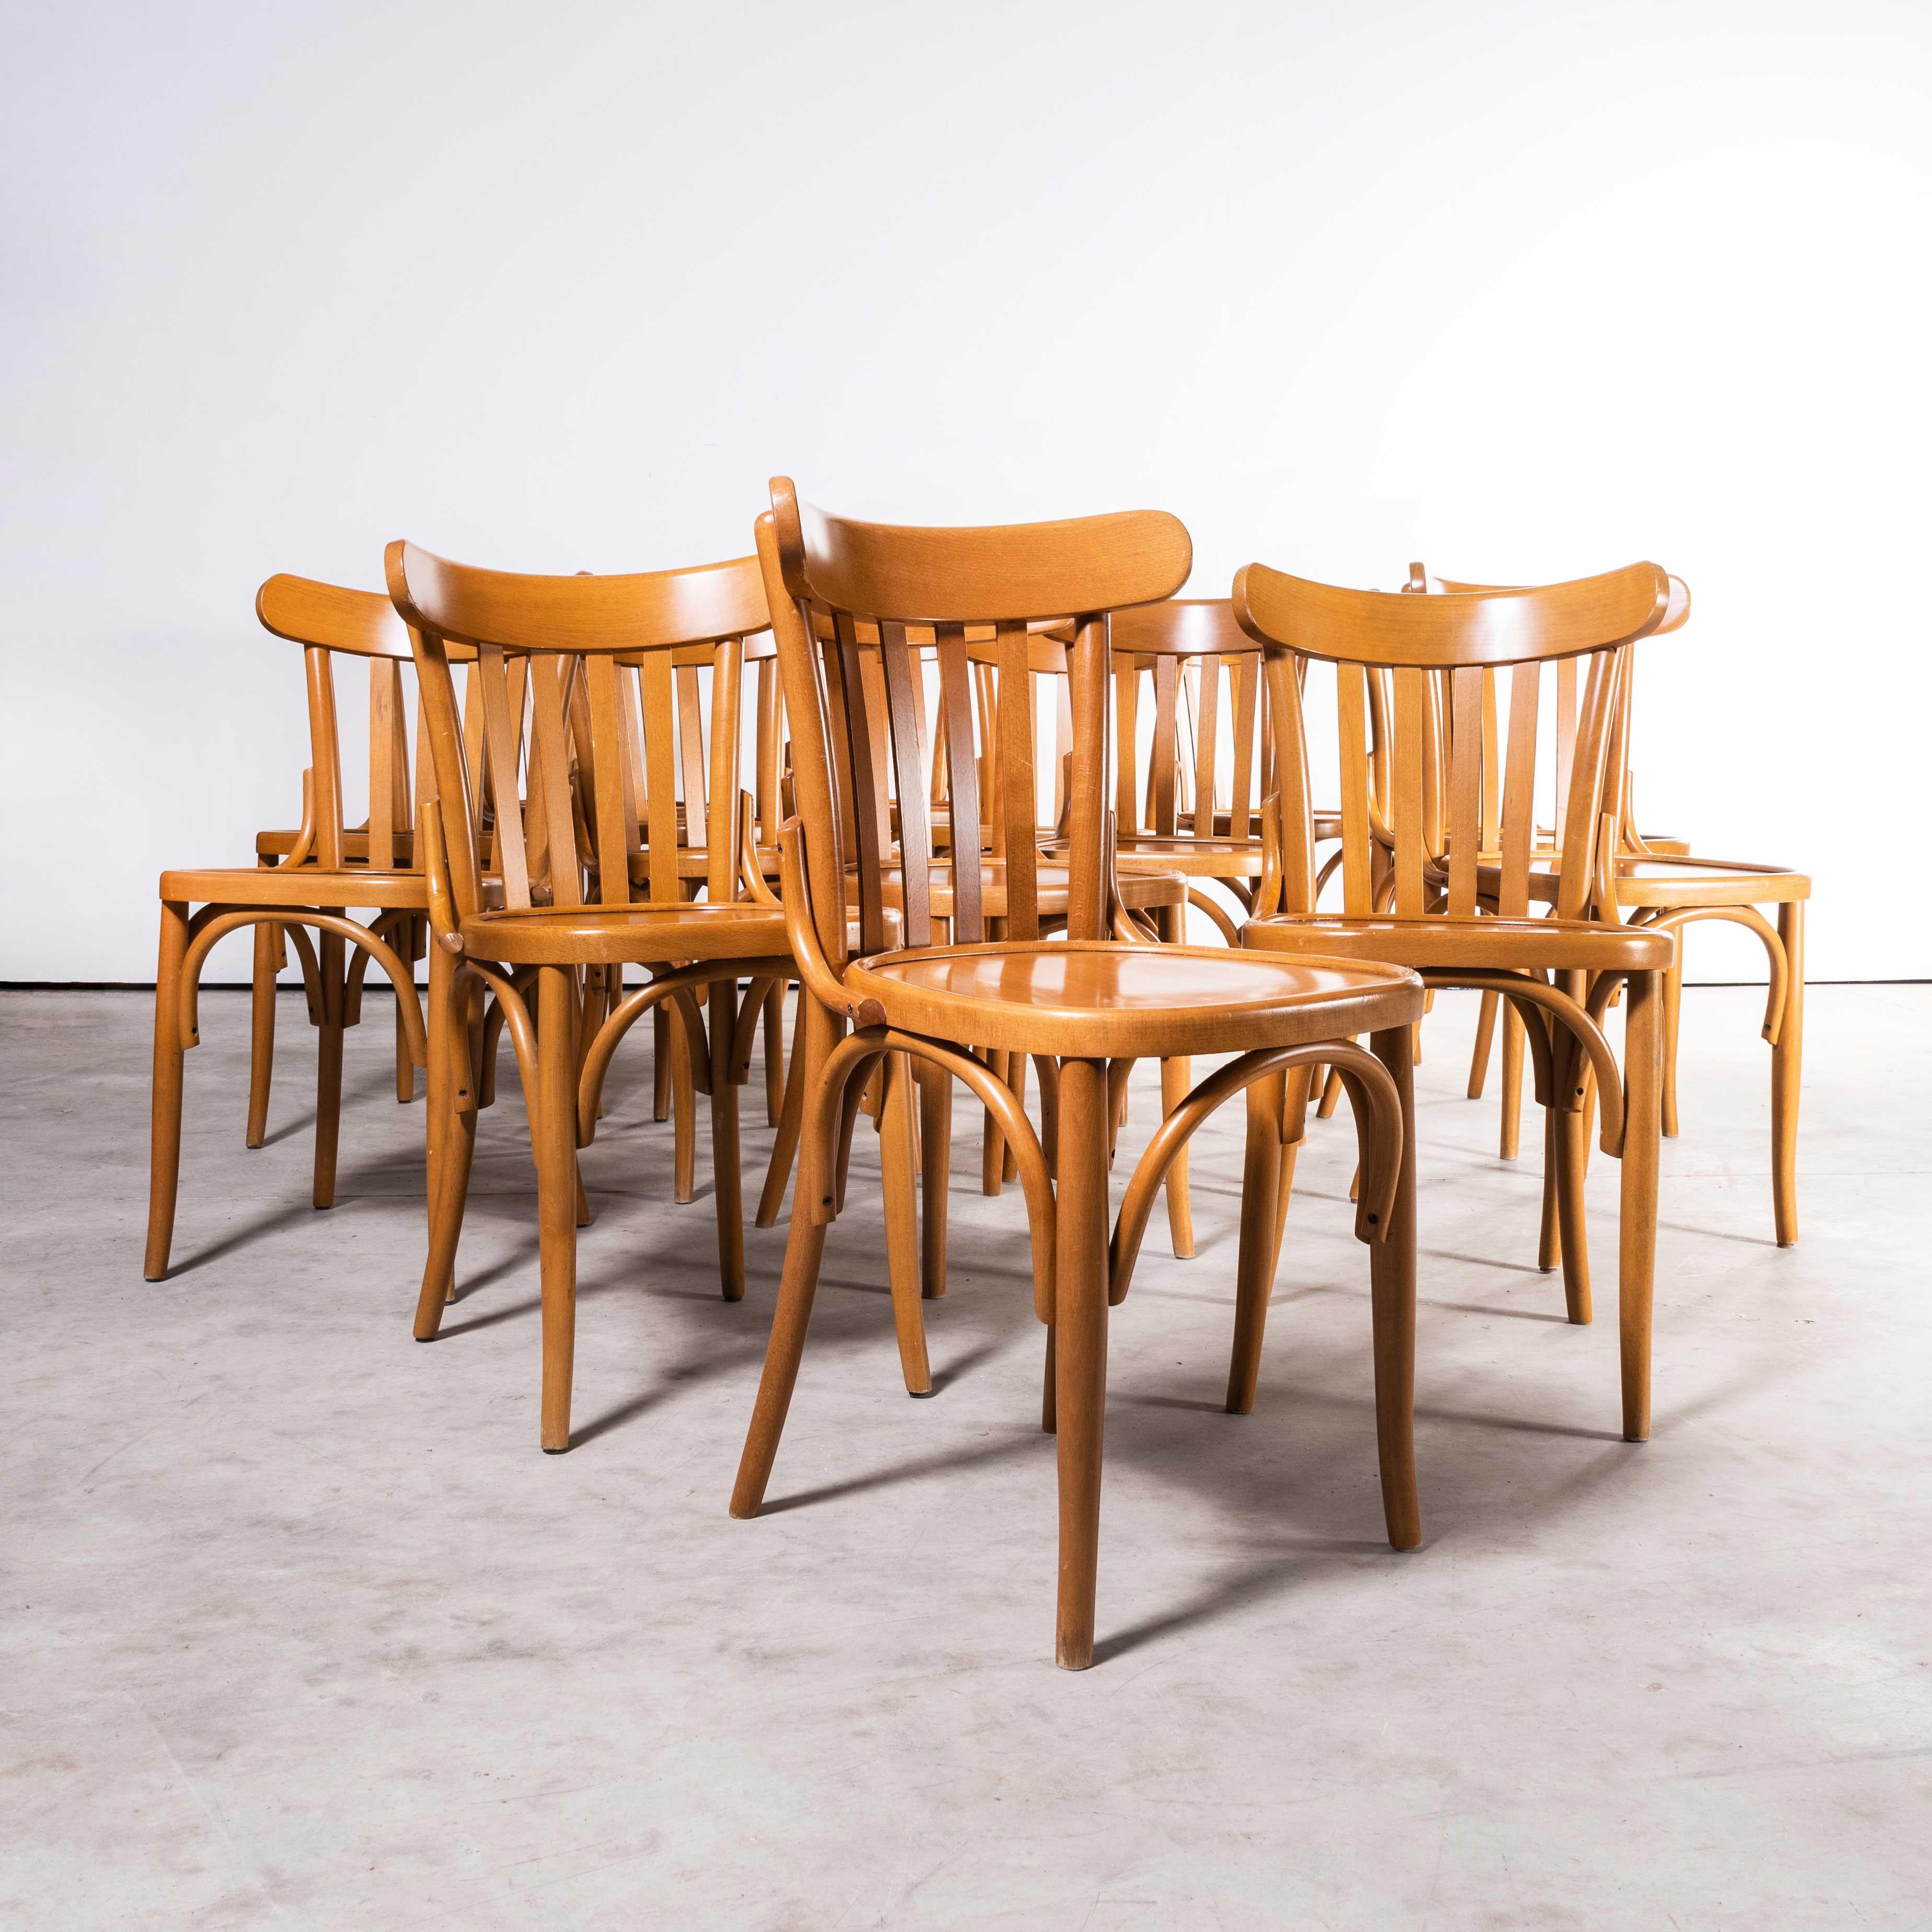 1970’s Bentwood honey beech bentwood dining chairs – set of fifteen
1970’s Bentwood honey beech bentwood dining chairs – set of fifteen. Sourced in France these are late production chairs from a traditional bentwood factory in Eastern Europe. High